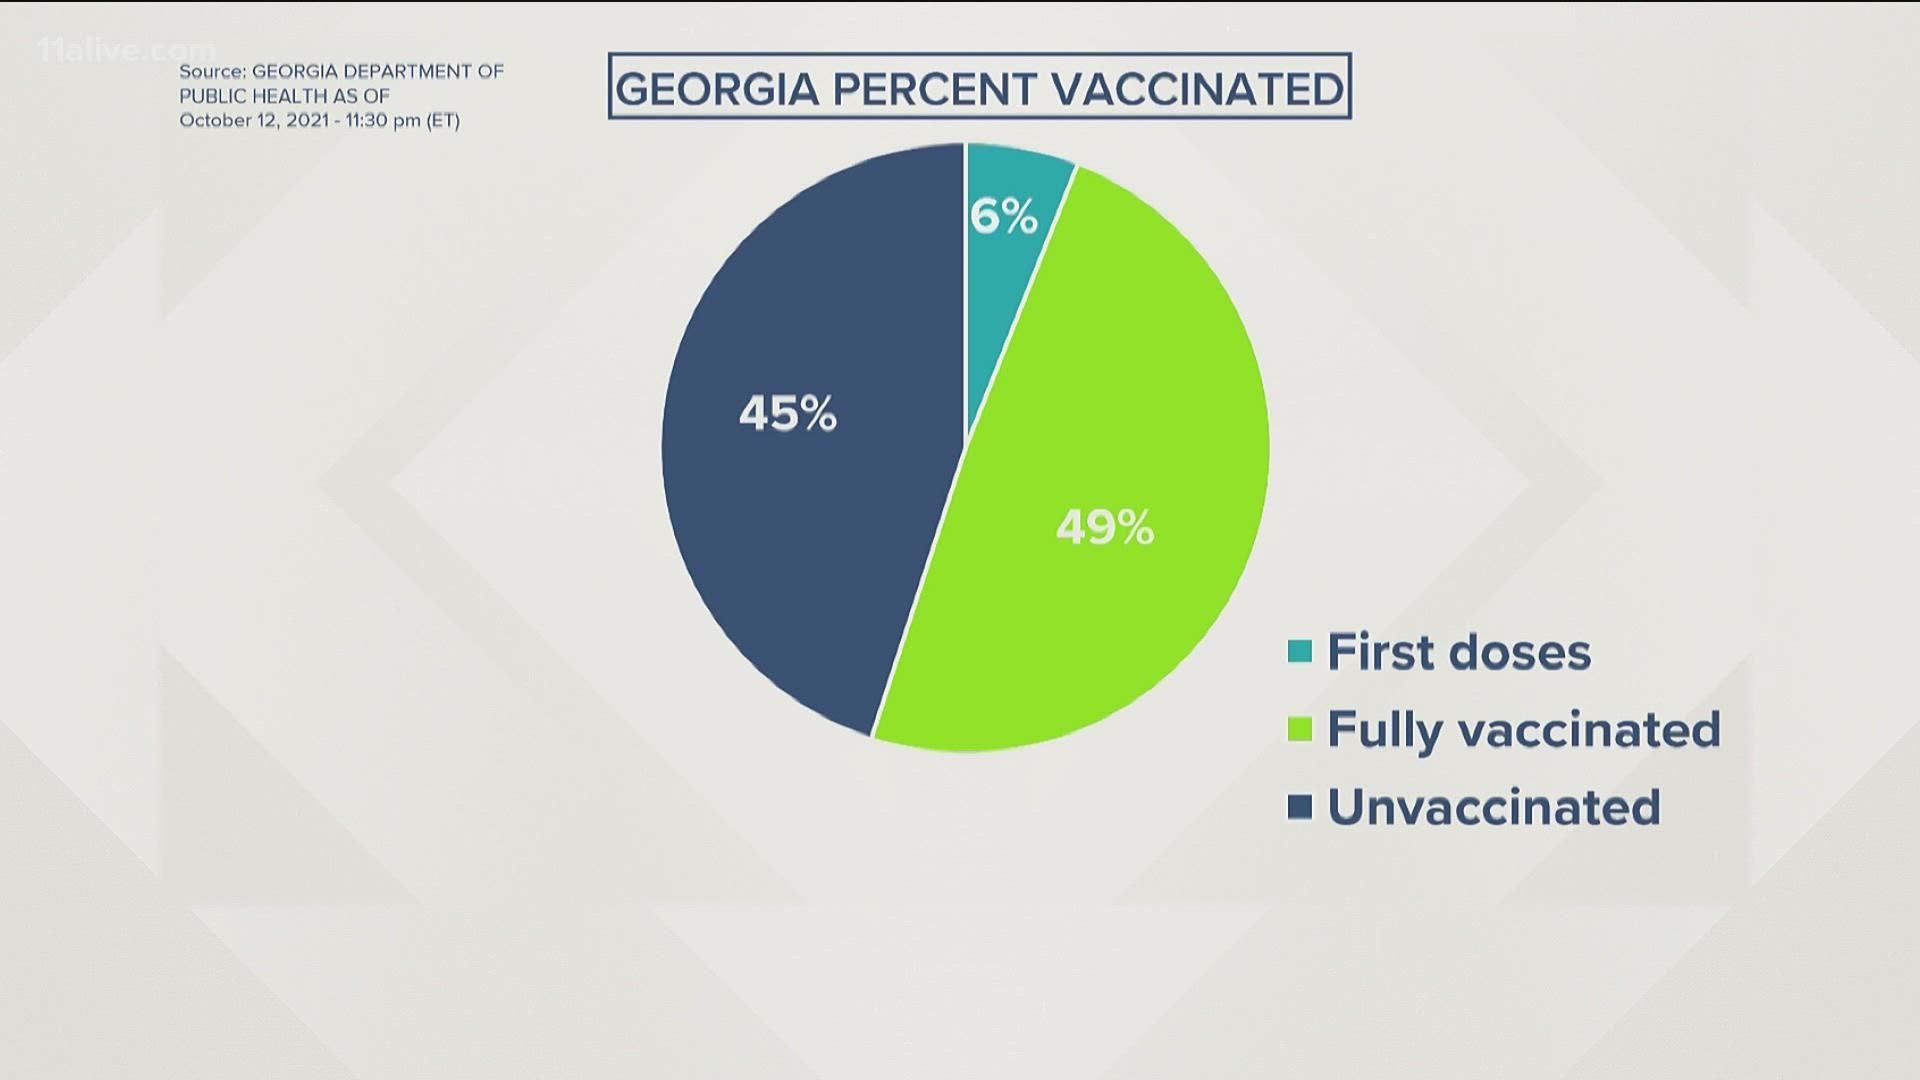 We are within the 10 lowest states in the country for vaccinations.